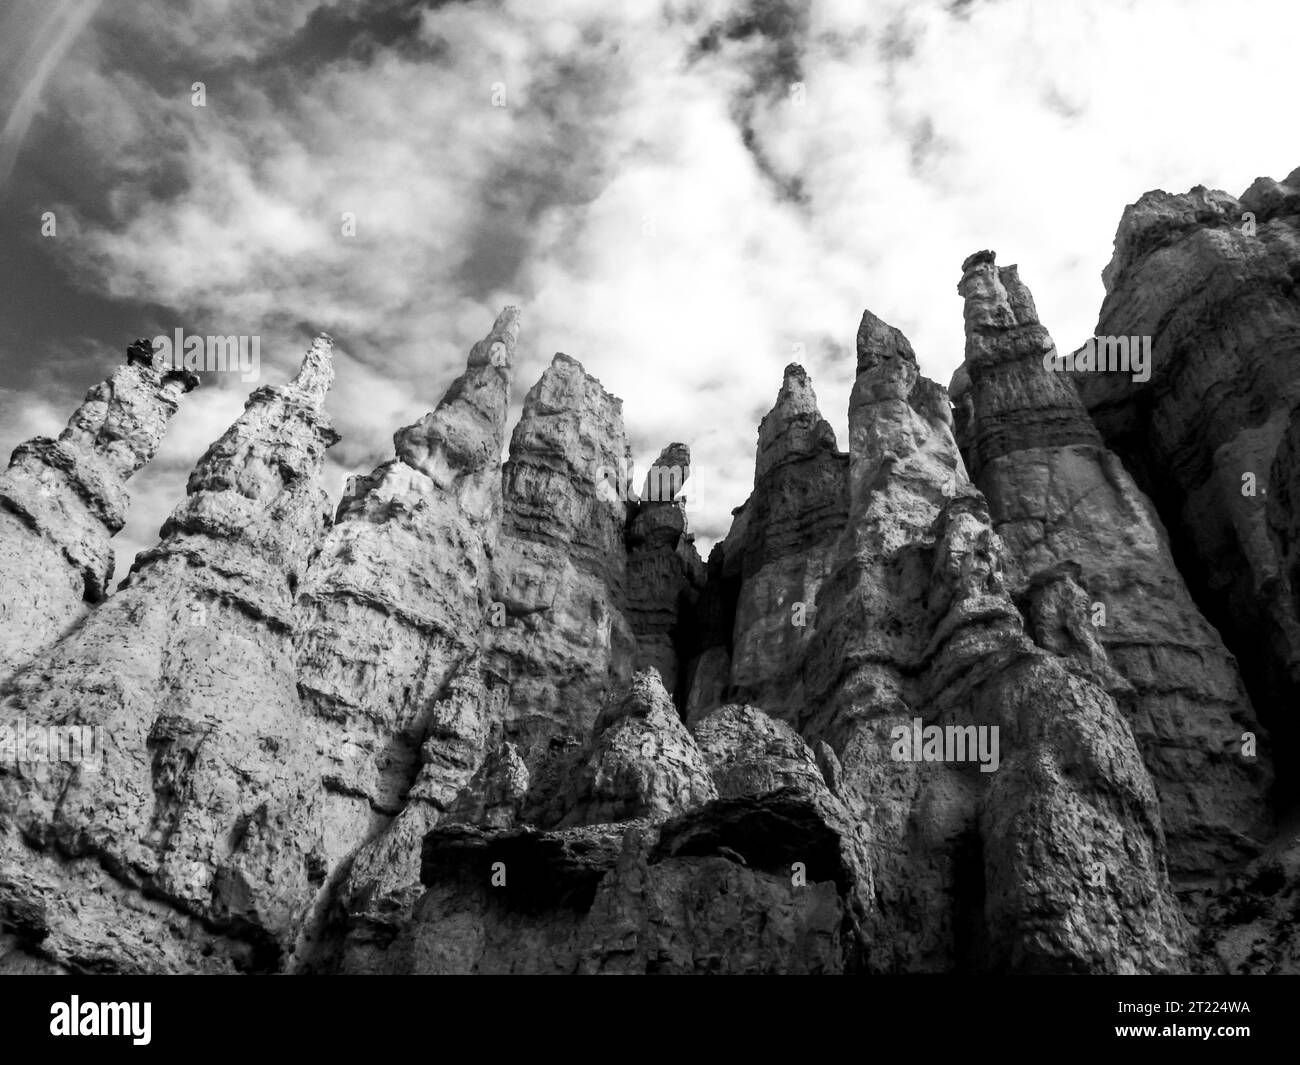 Tall imposing Hoodoos of Bryce Canyon, Utah, in Black and White Stock Photo